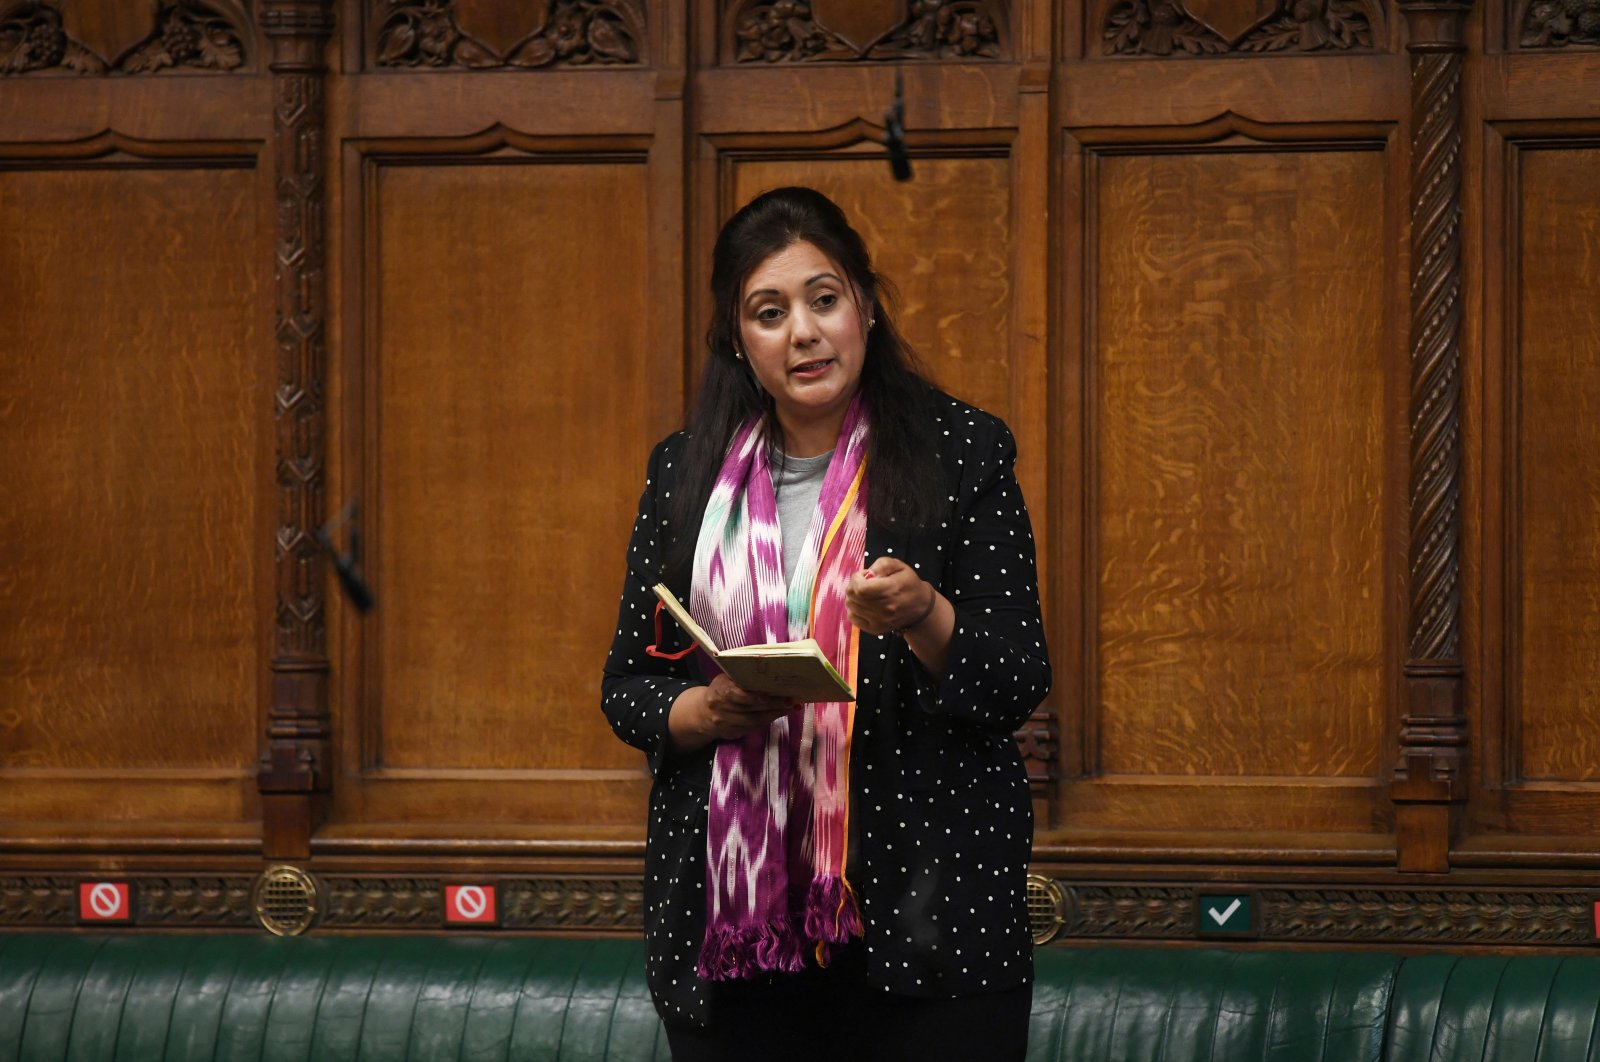 Former junior transport minister Nusrat Ghani speaks during a session in Parliament in London, Britain, May 12, 2021. (UK Parliament/Jessica Taylor/Handout via Reuters)